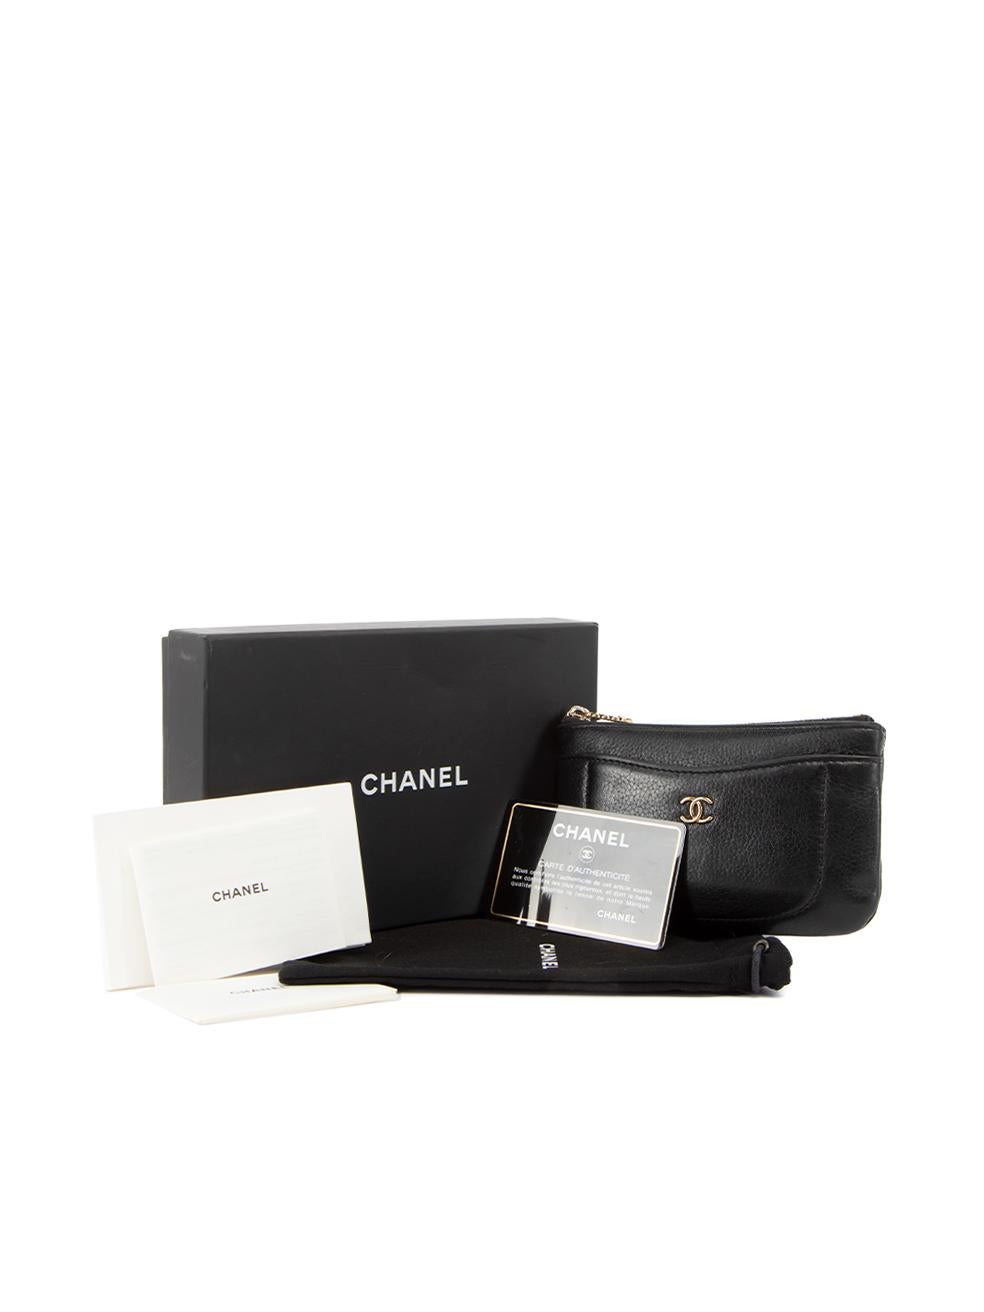 Chanel Women's Black Leather CC Zip Top Coin Purse 4